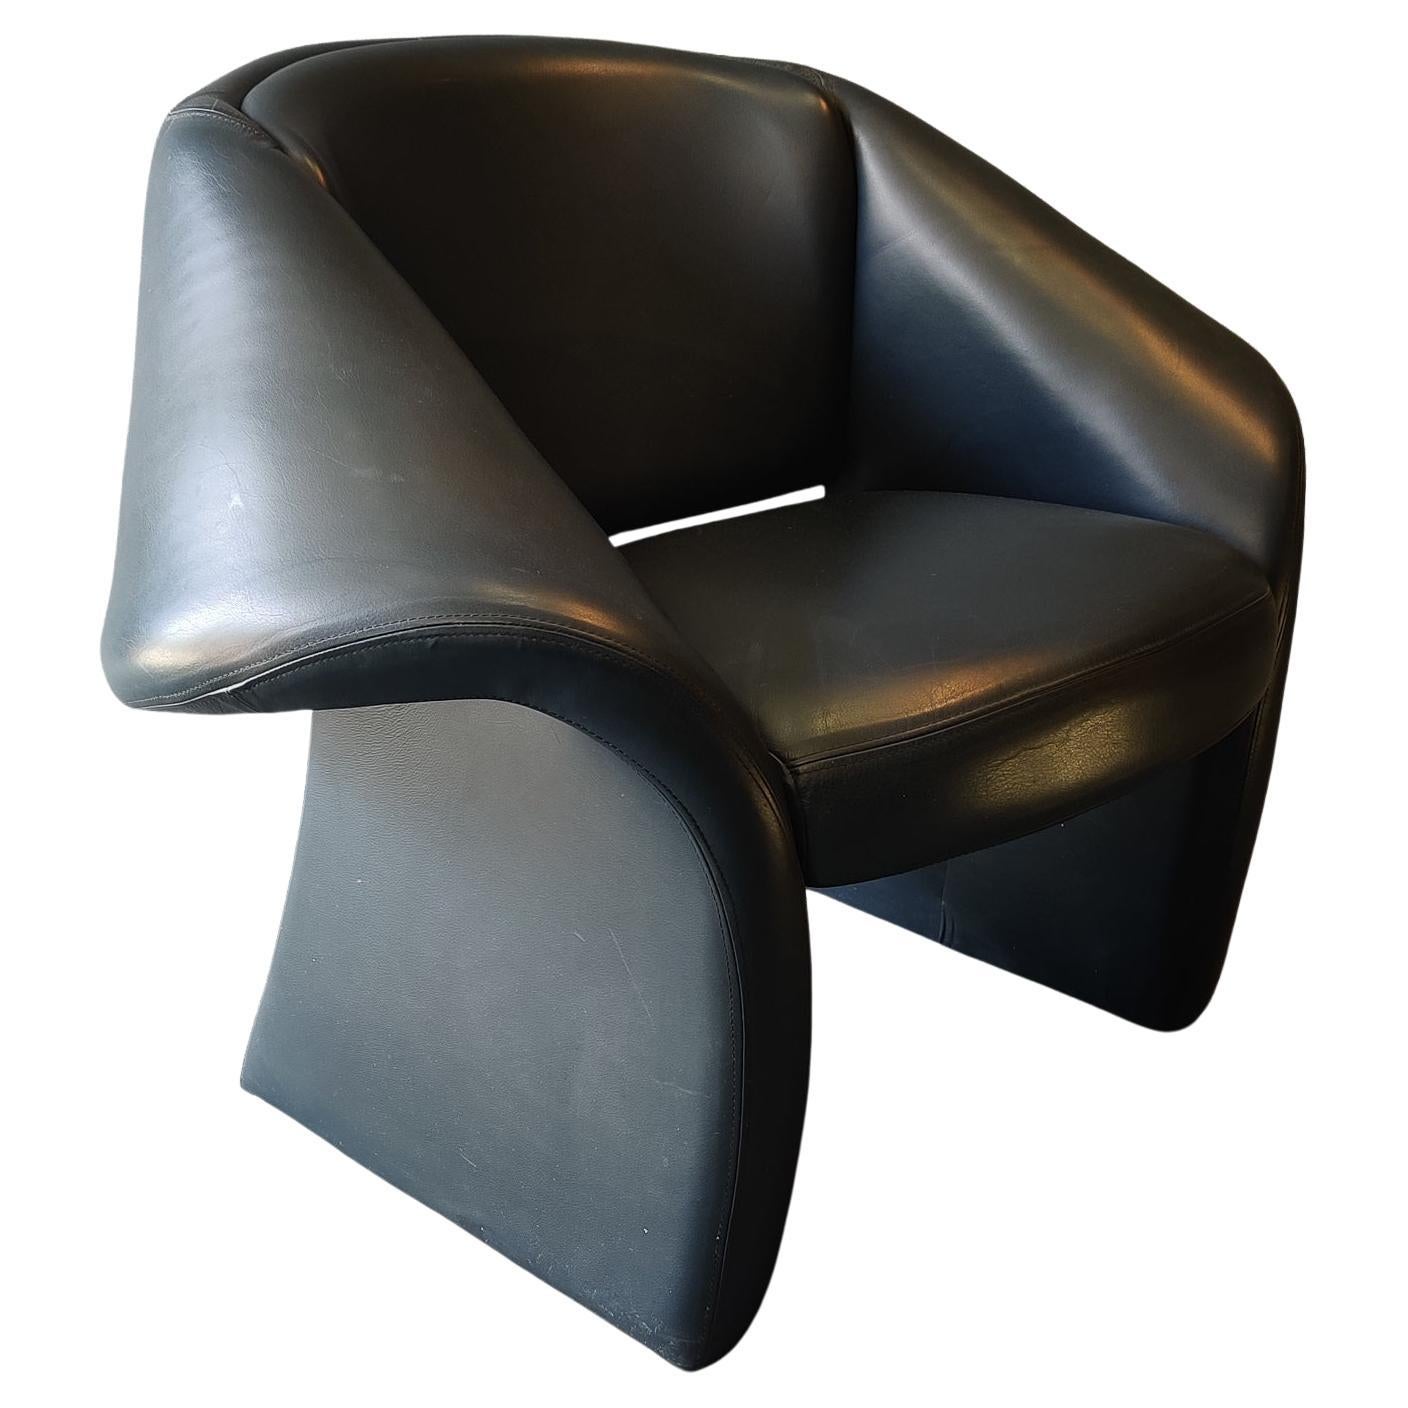 Post-Modern 1980s, Sculptural Dark Blue Leather Lounge Chair Pierre Paulin Style For Sale